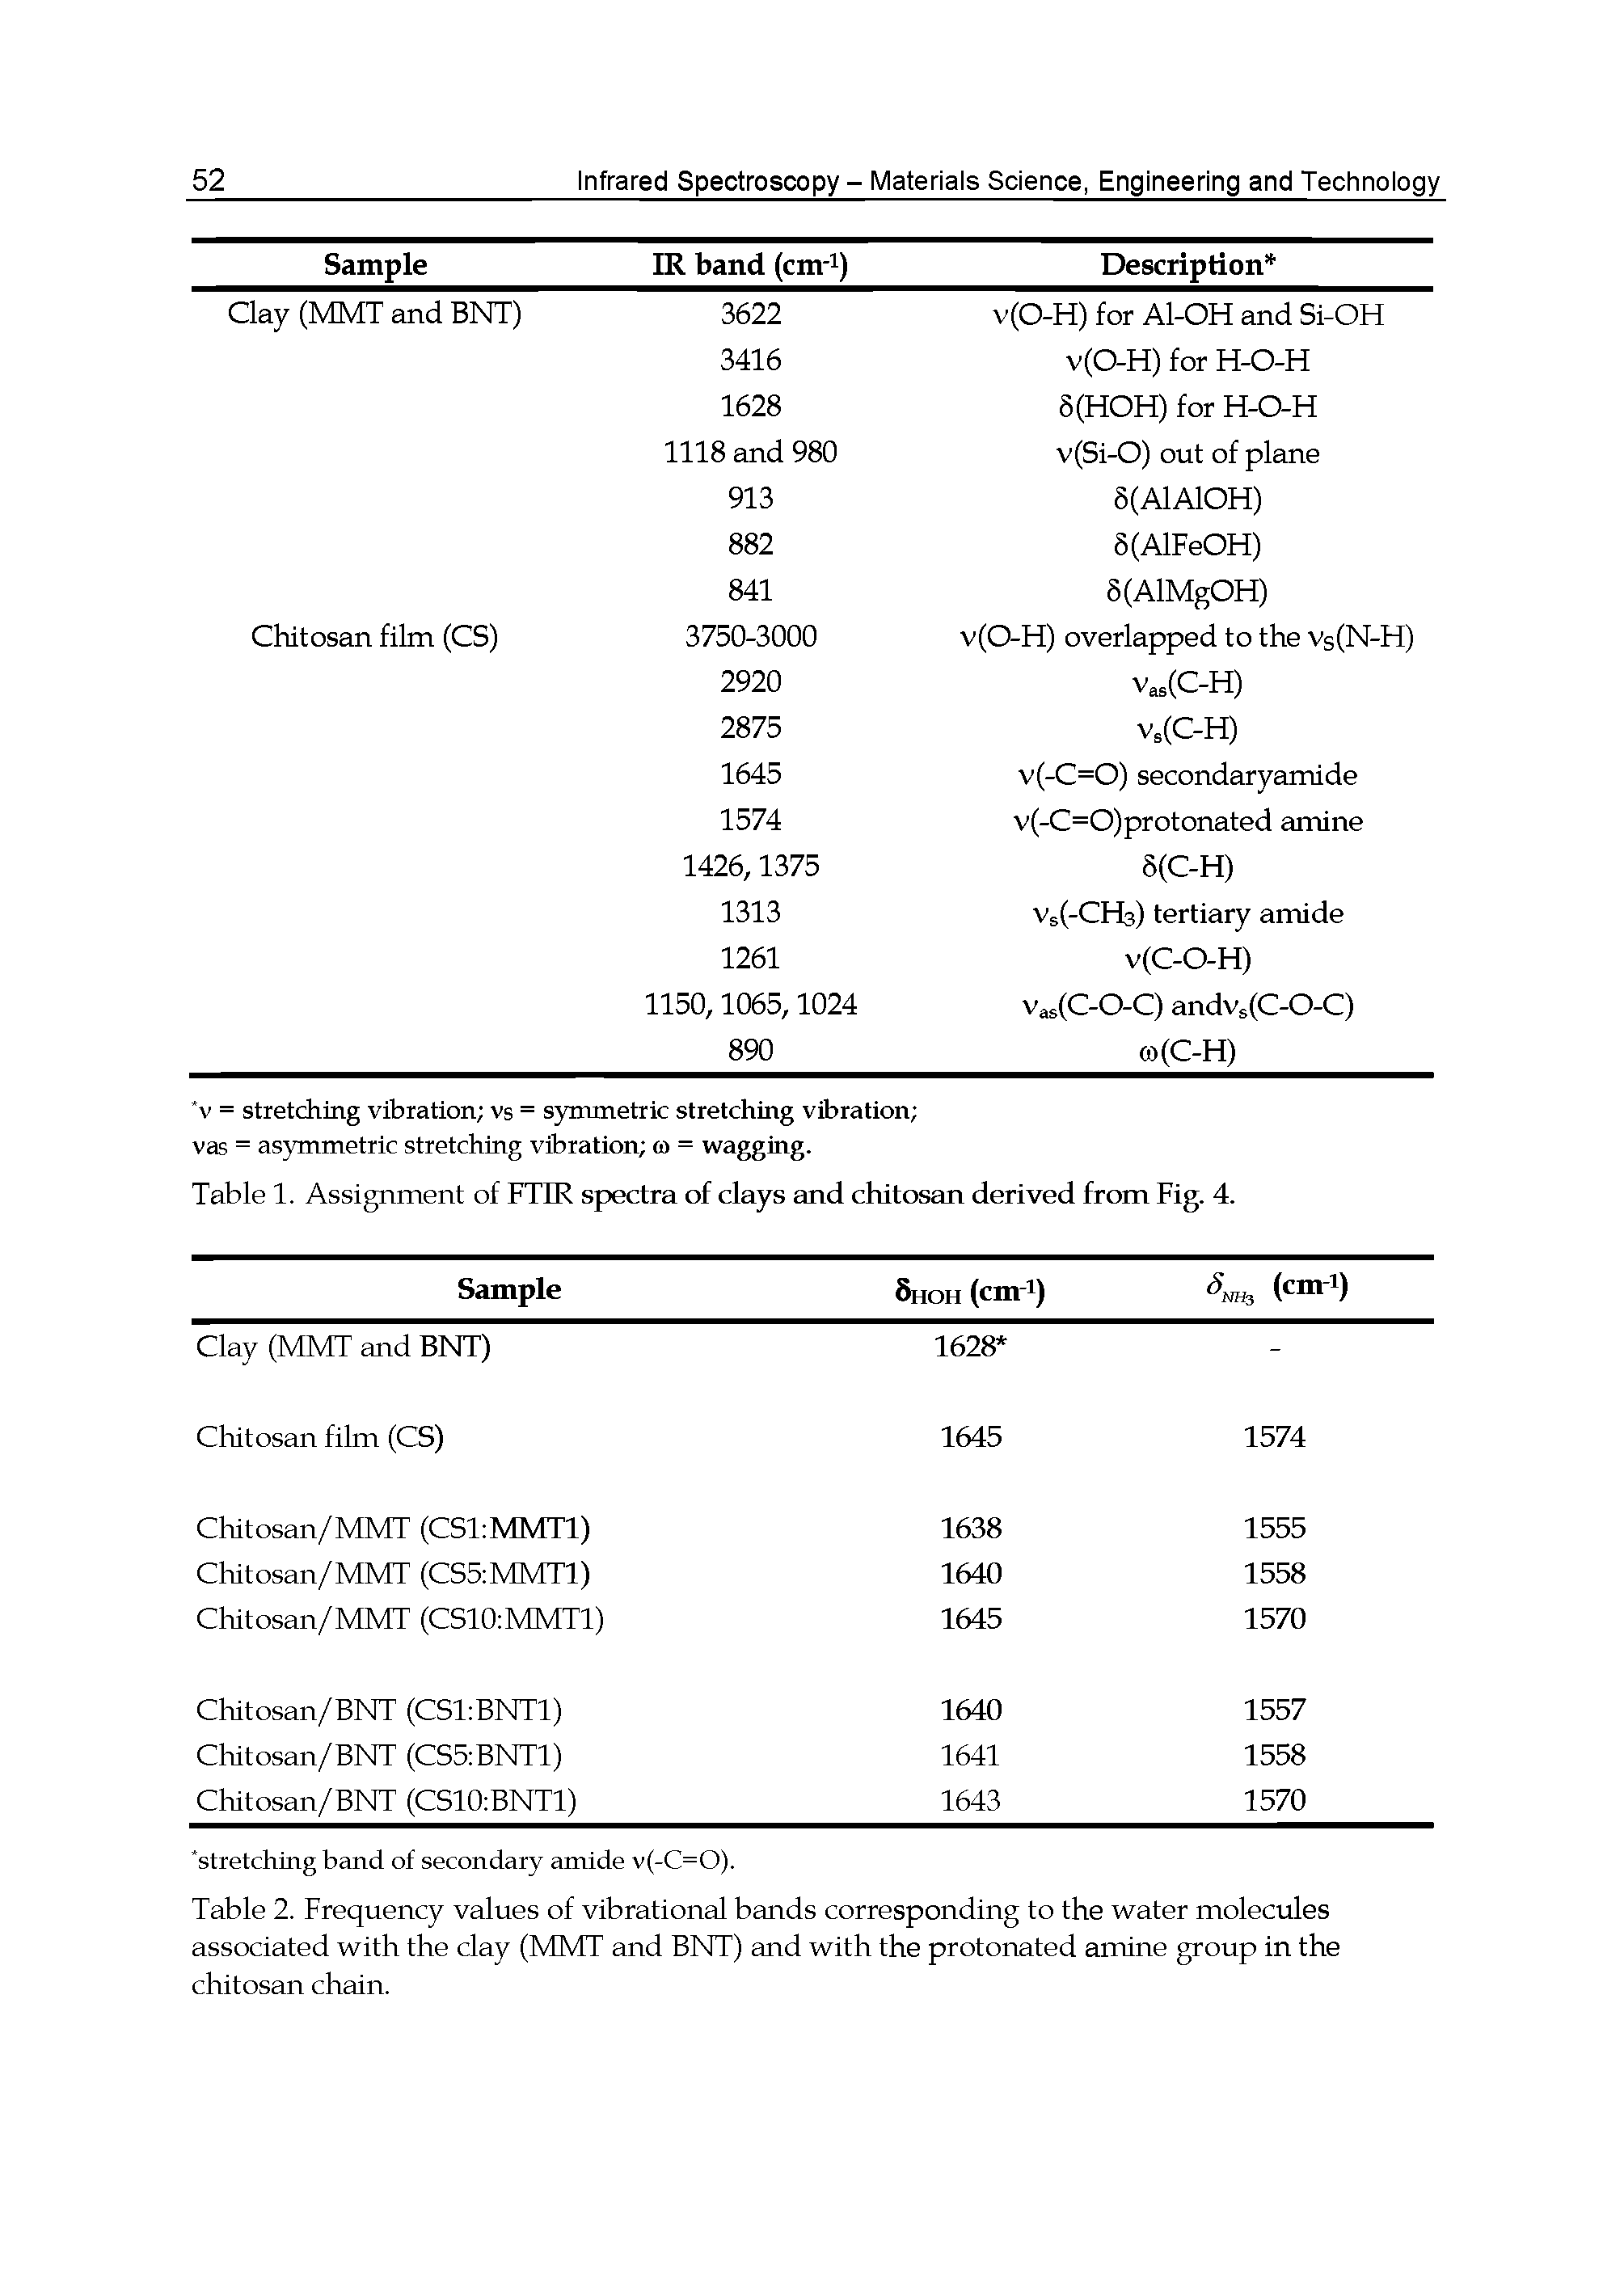 Table 2. Frequency values of vibrational bands corresponding to the water molecules associated with the clay (MMT and BNT) and with the protonated amine group in the chitosan chain.